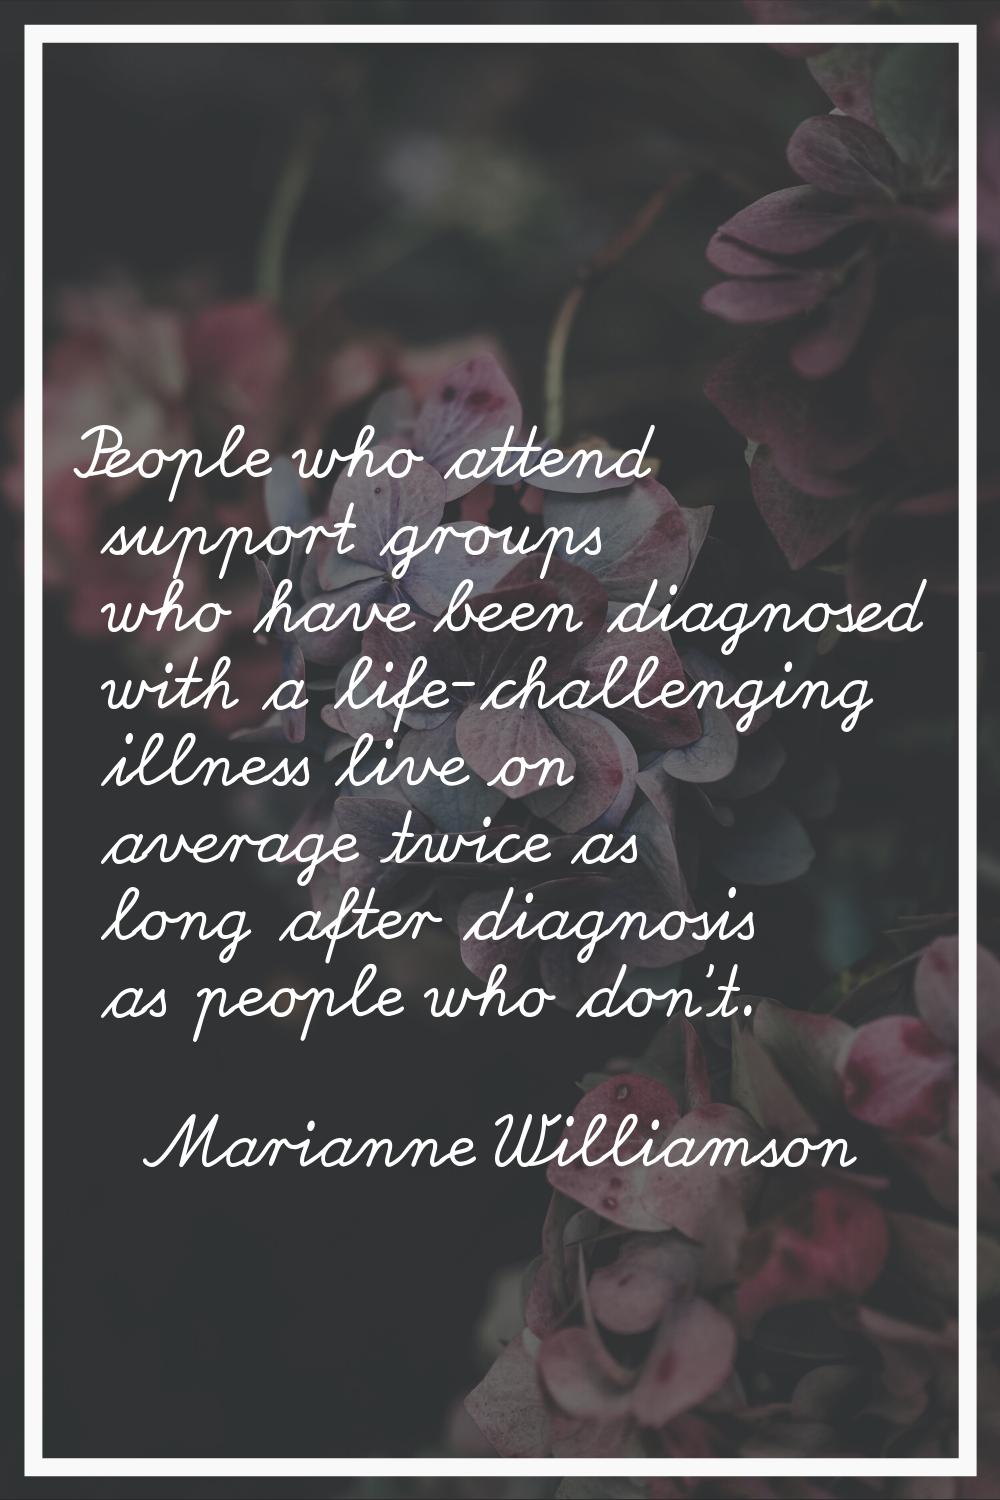 People who attend support groups who have been diagnosed with a life-challenging illness live on av